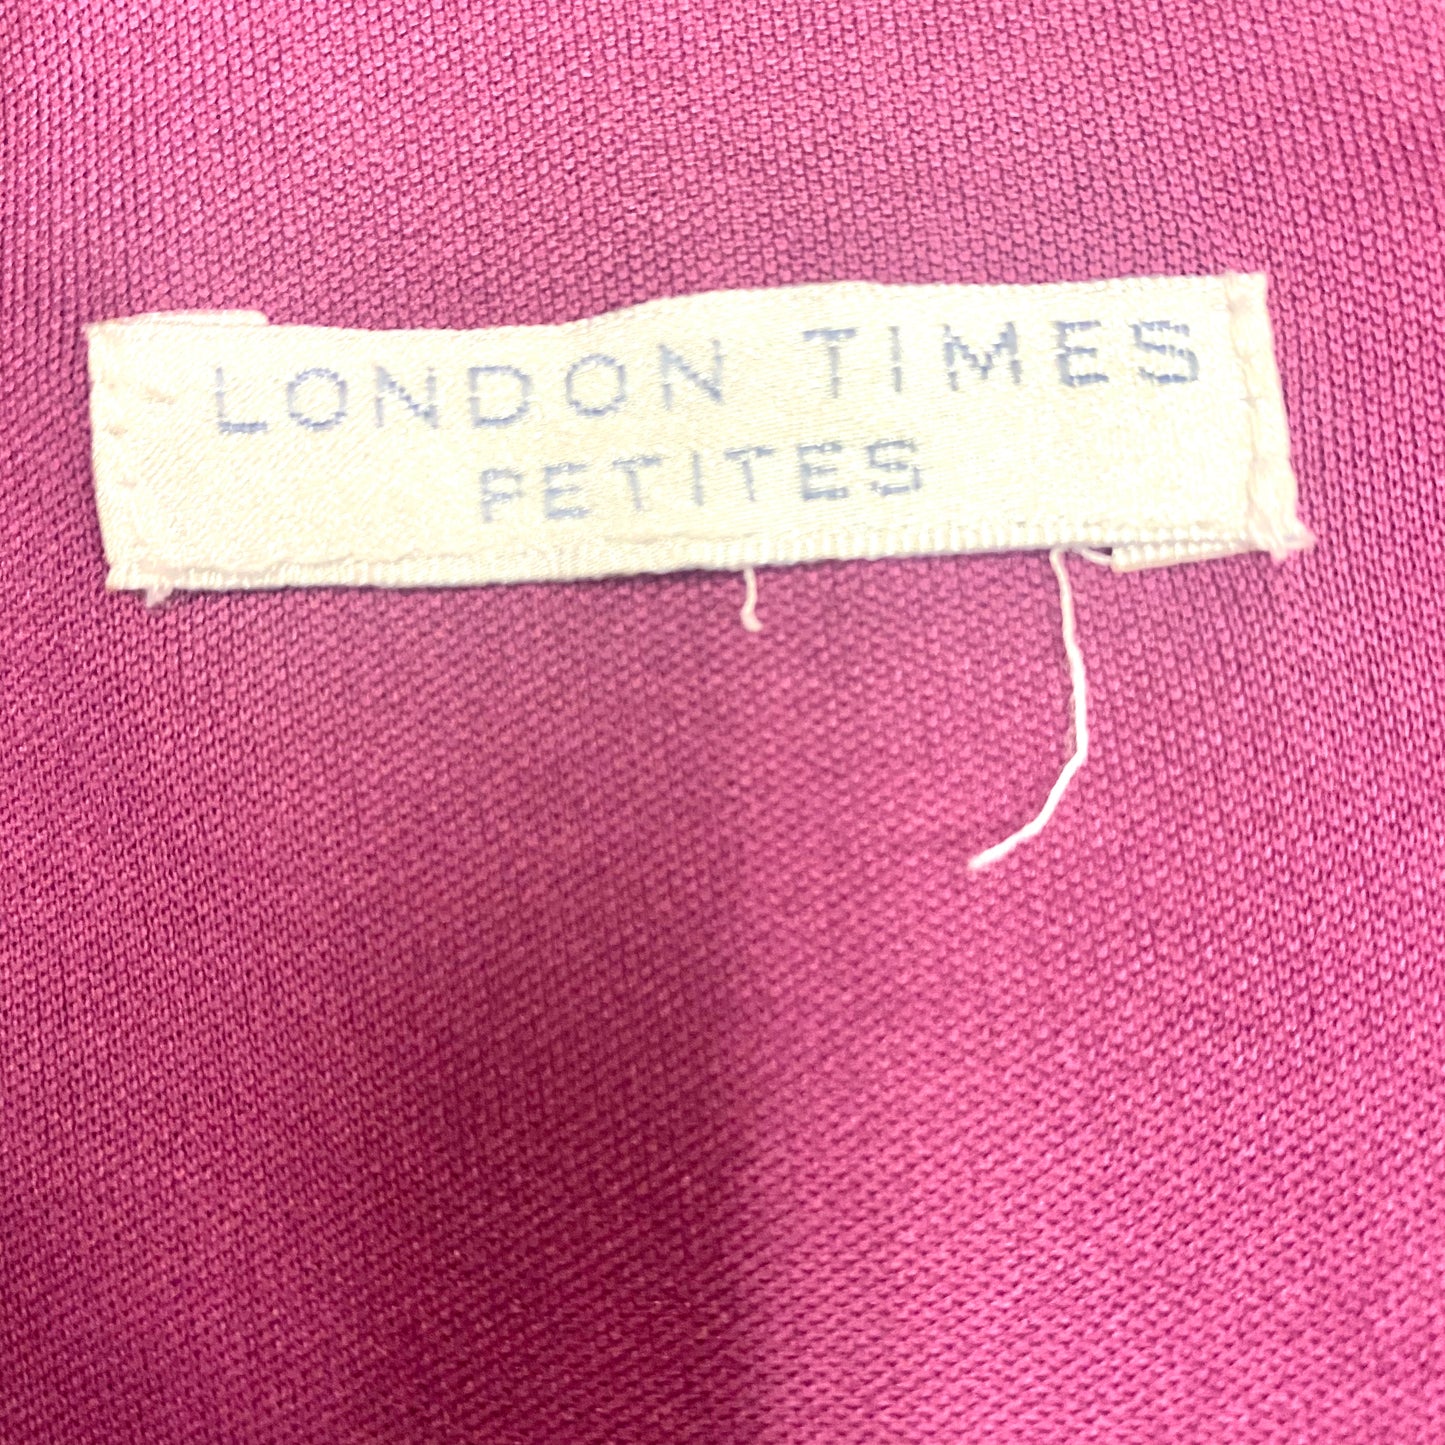 Dress Work By London Times  Size: S